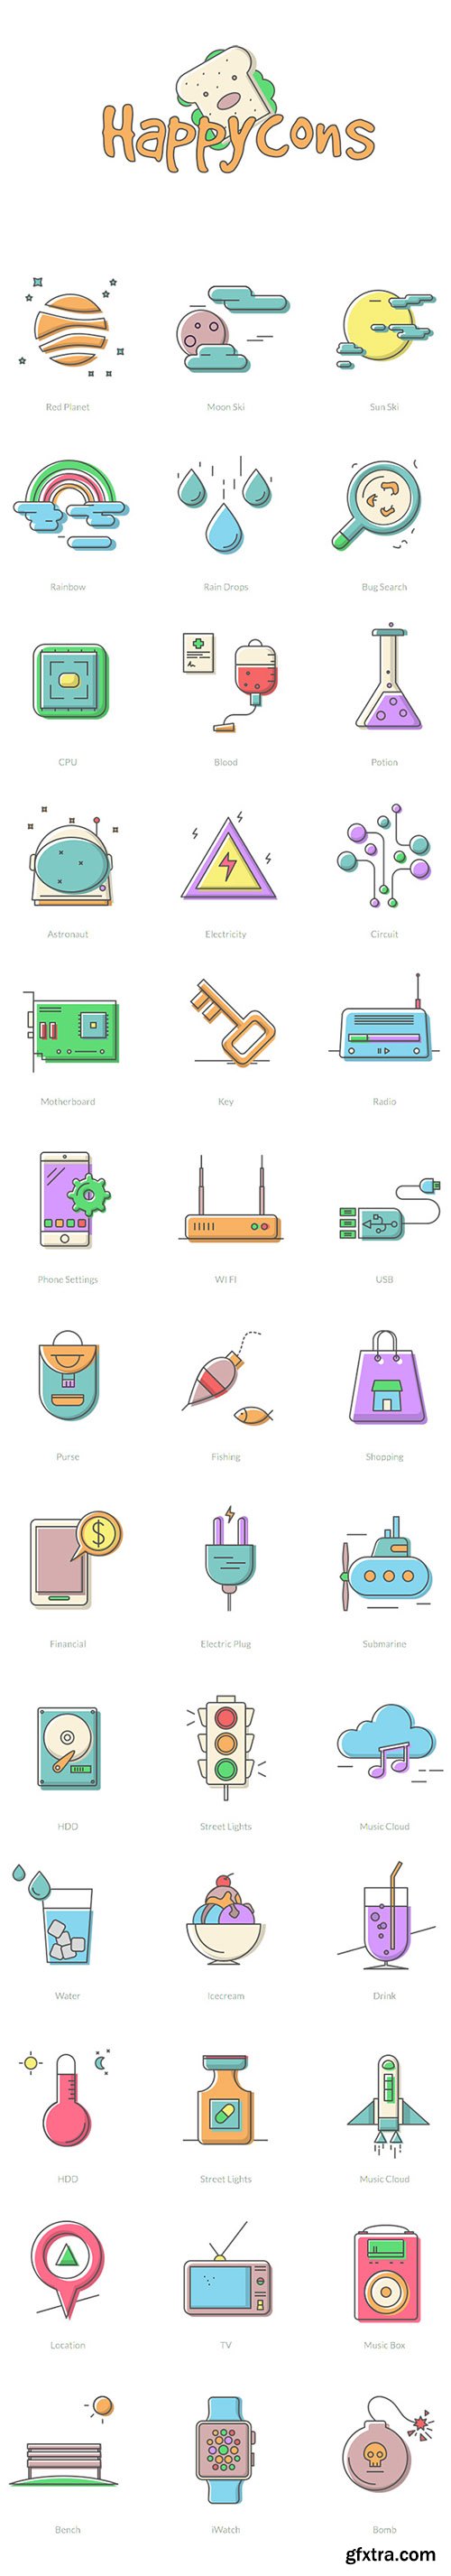 AI, EPS, PNG, SVG, SCETCH Vector Web Icons - Happycons